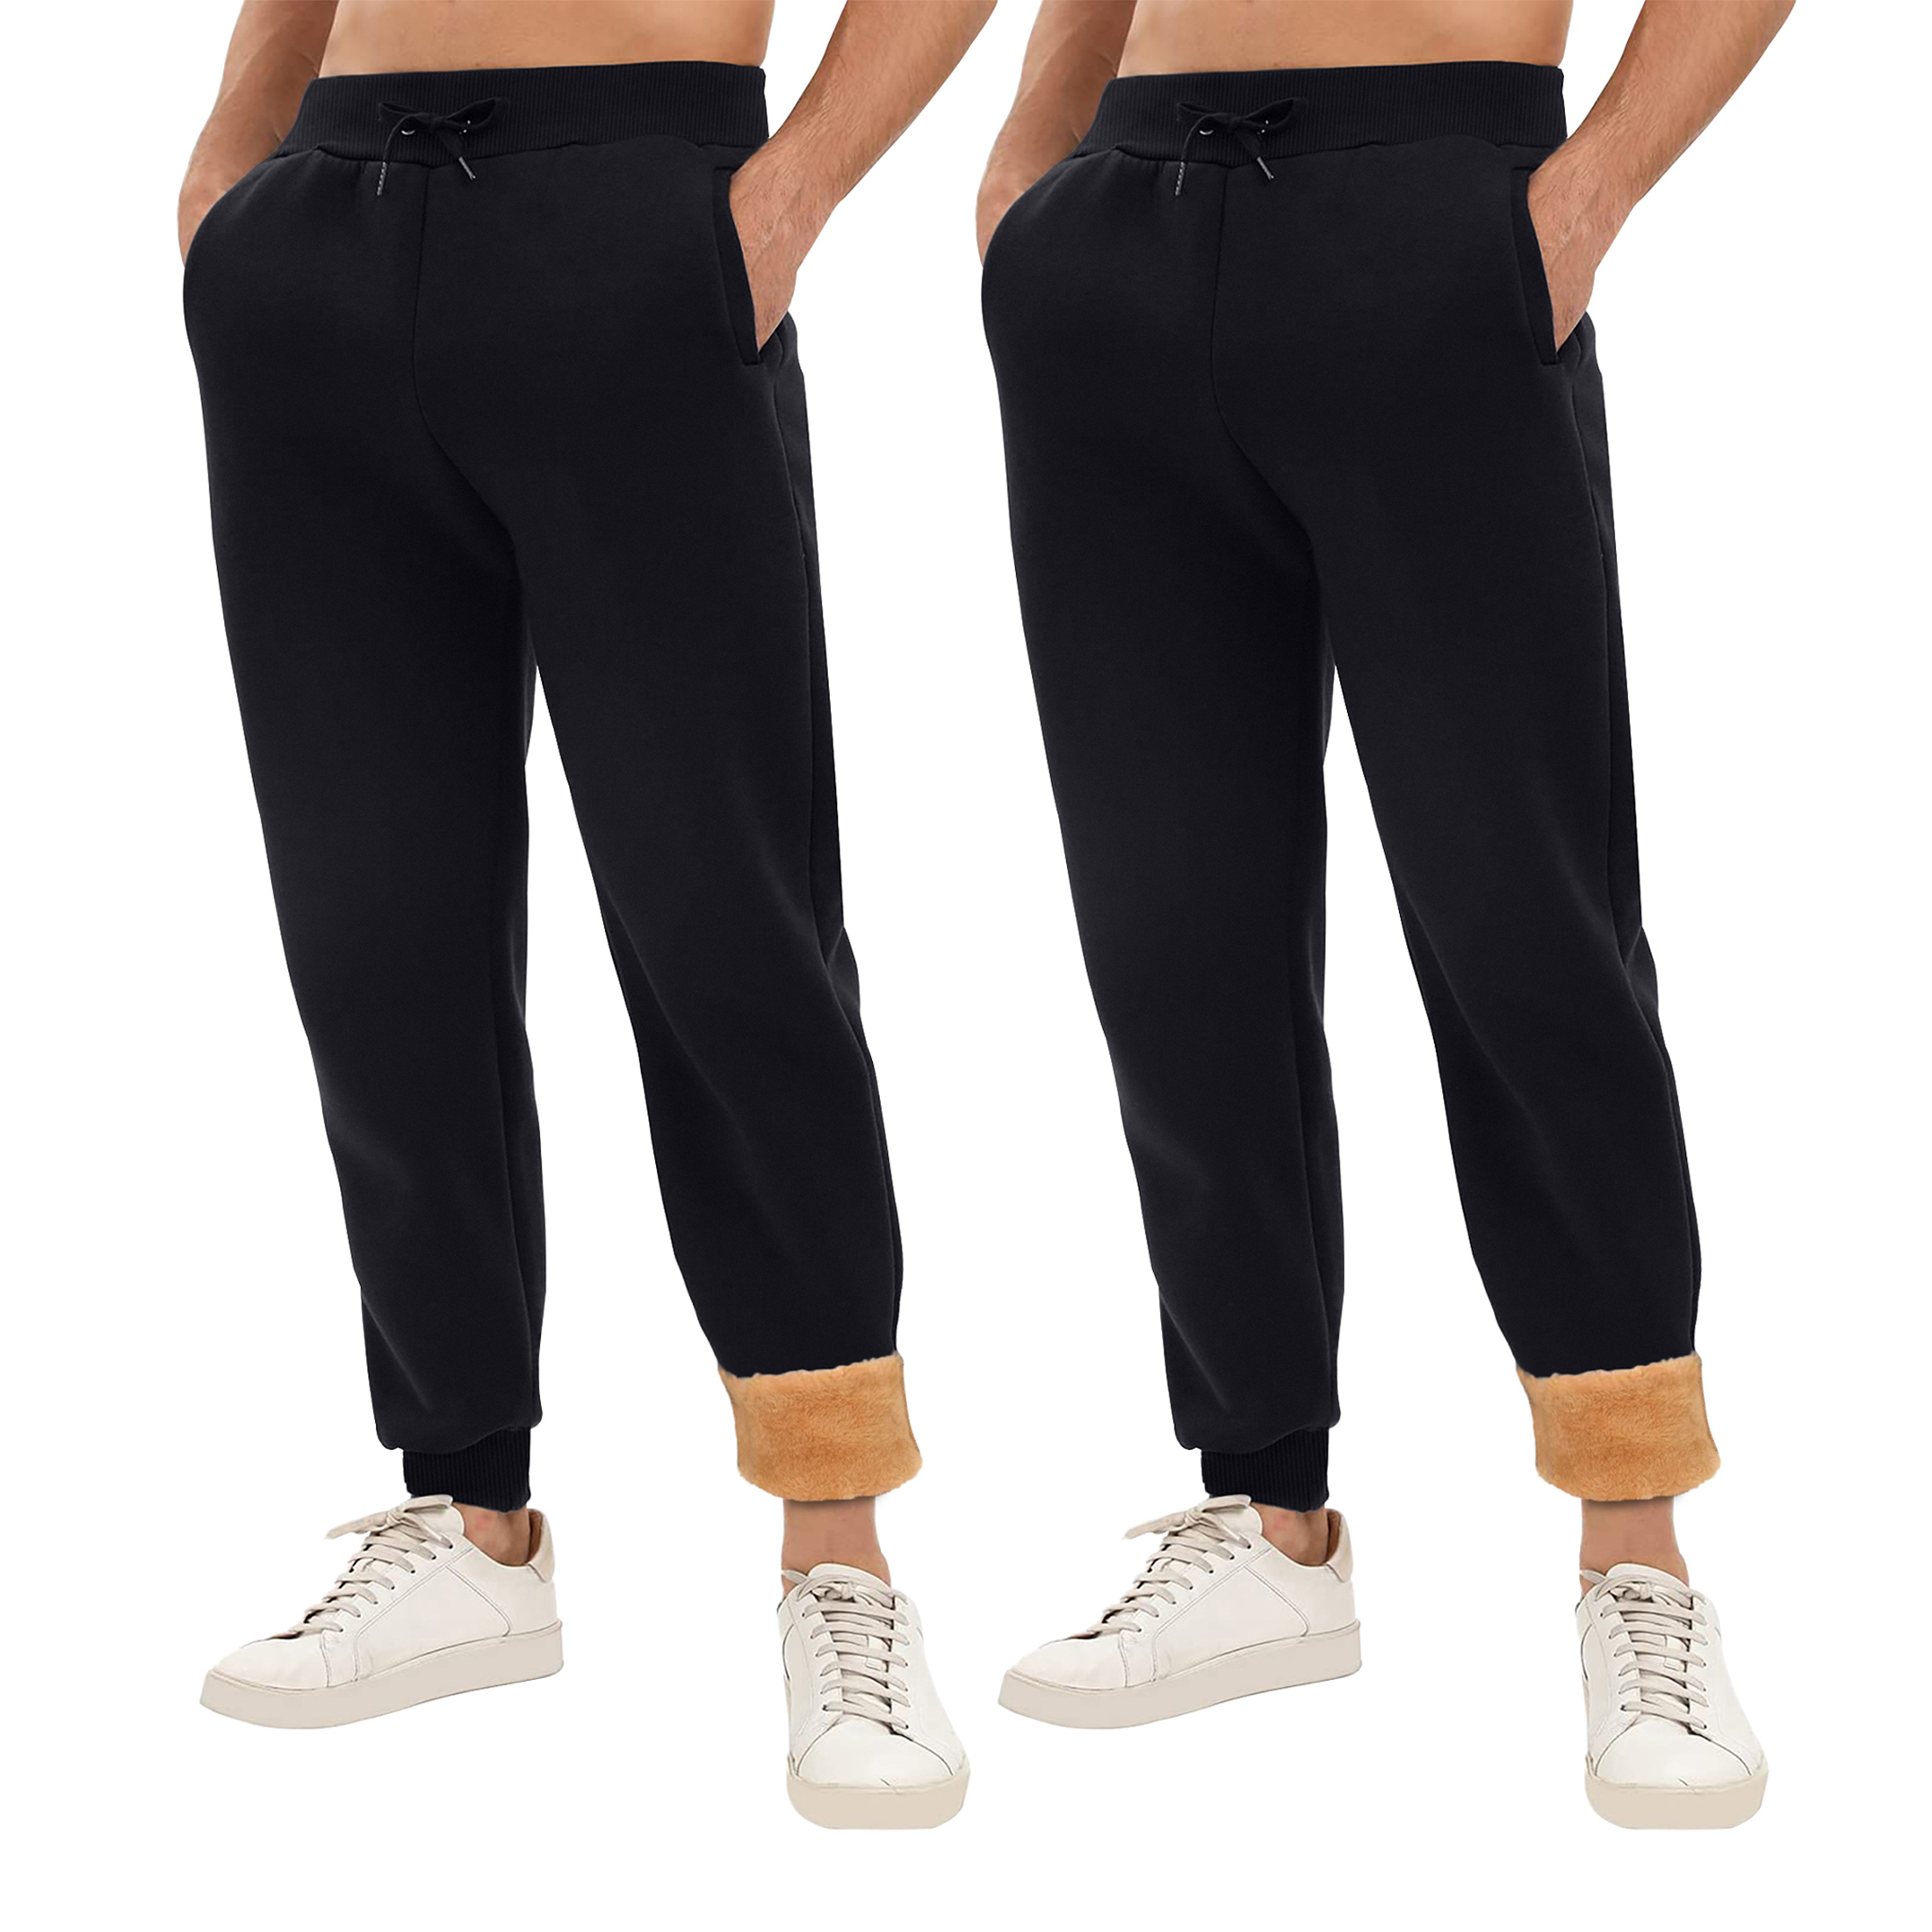 2-Pack: Men's Winter Warm Thick Sherpa Lined Jogger Track Pants With Pockets - Black & Navy, Medium